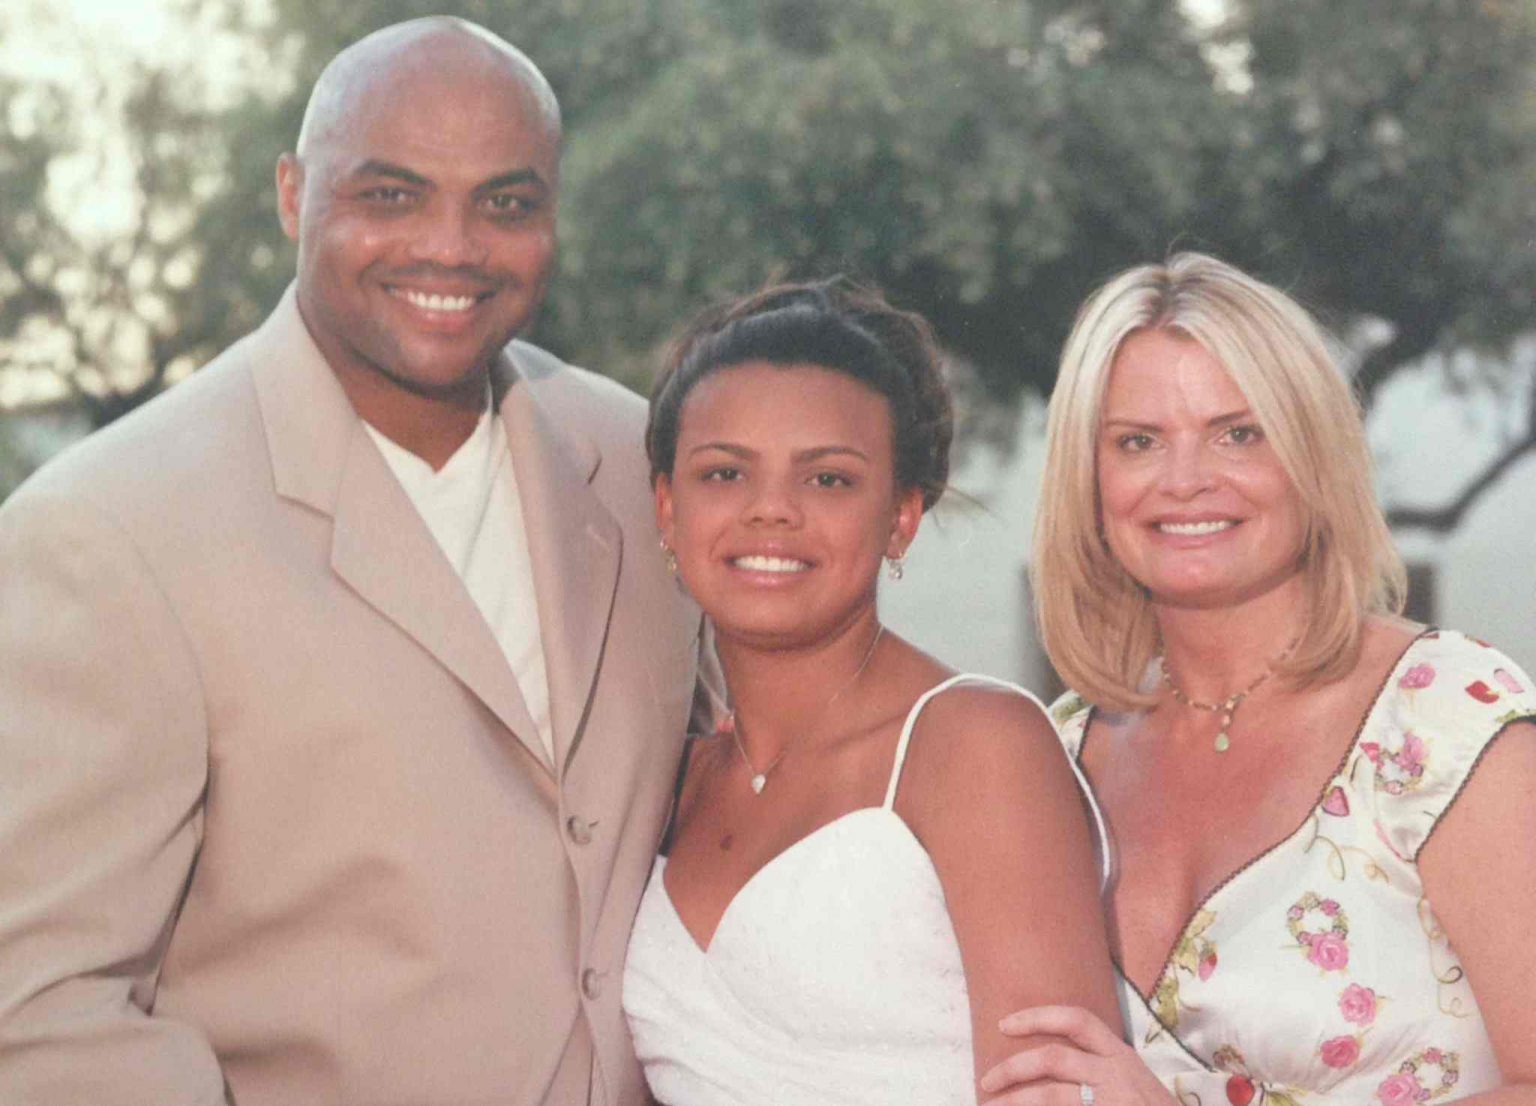 Who Is Charles Barkley Wife Maureen Blumhardt? Let’s Unfold the Untold